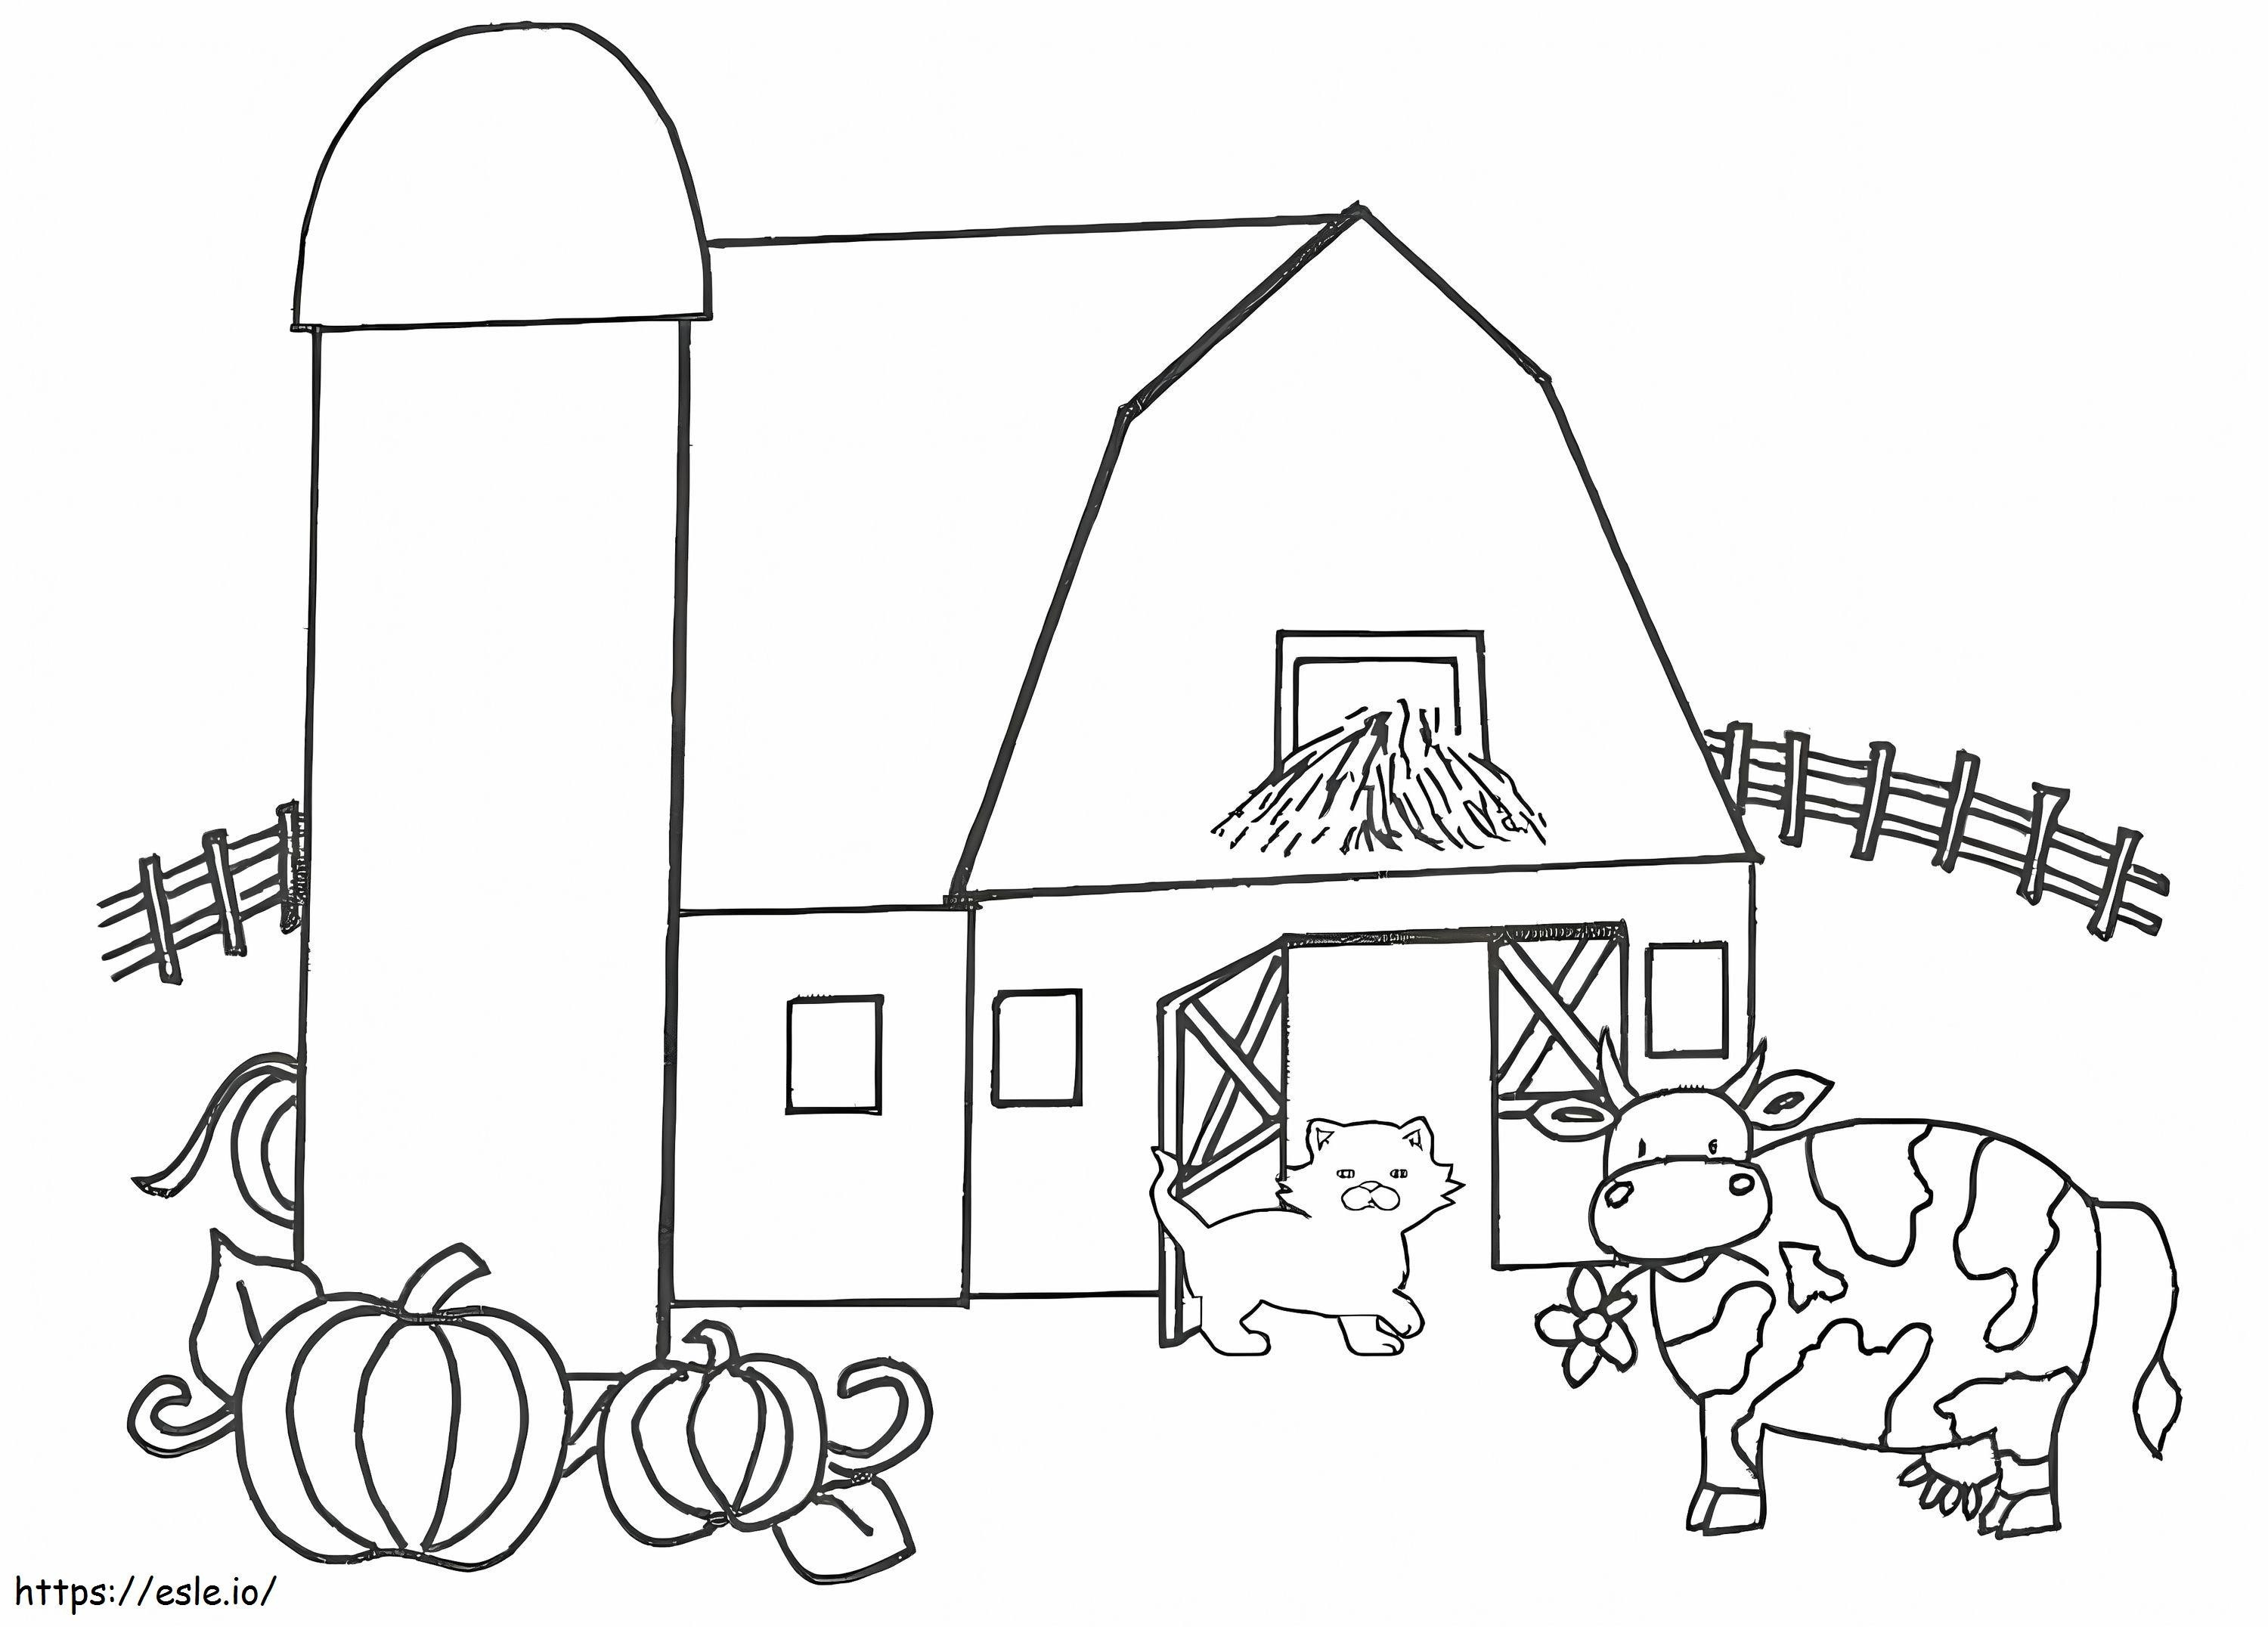 Basic Pen coloring page